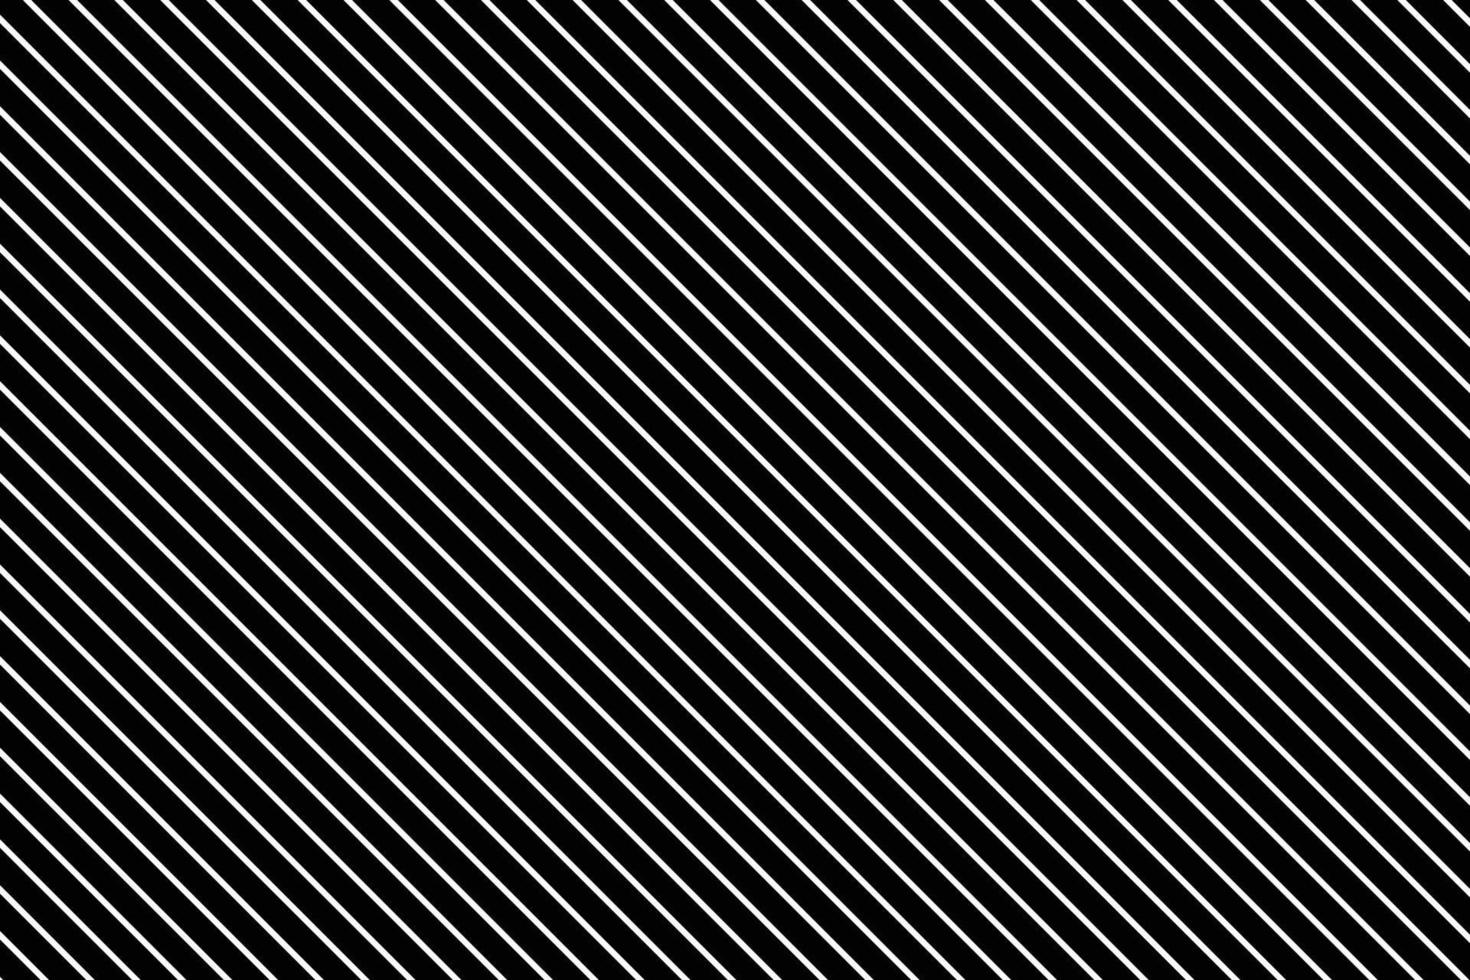 abstract seamless diagonal white line and black background pattern. vector